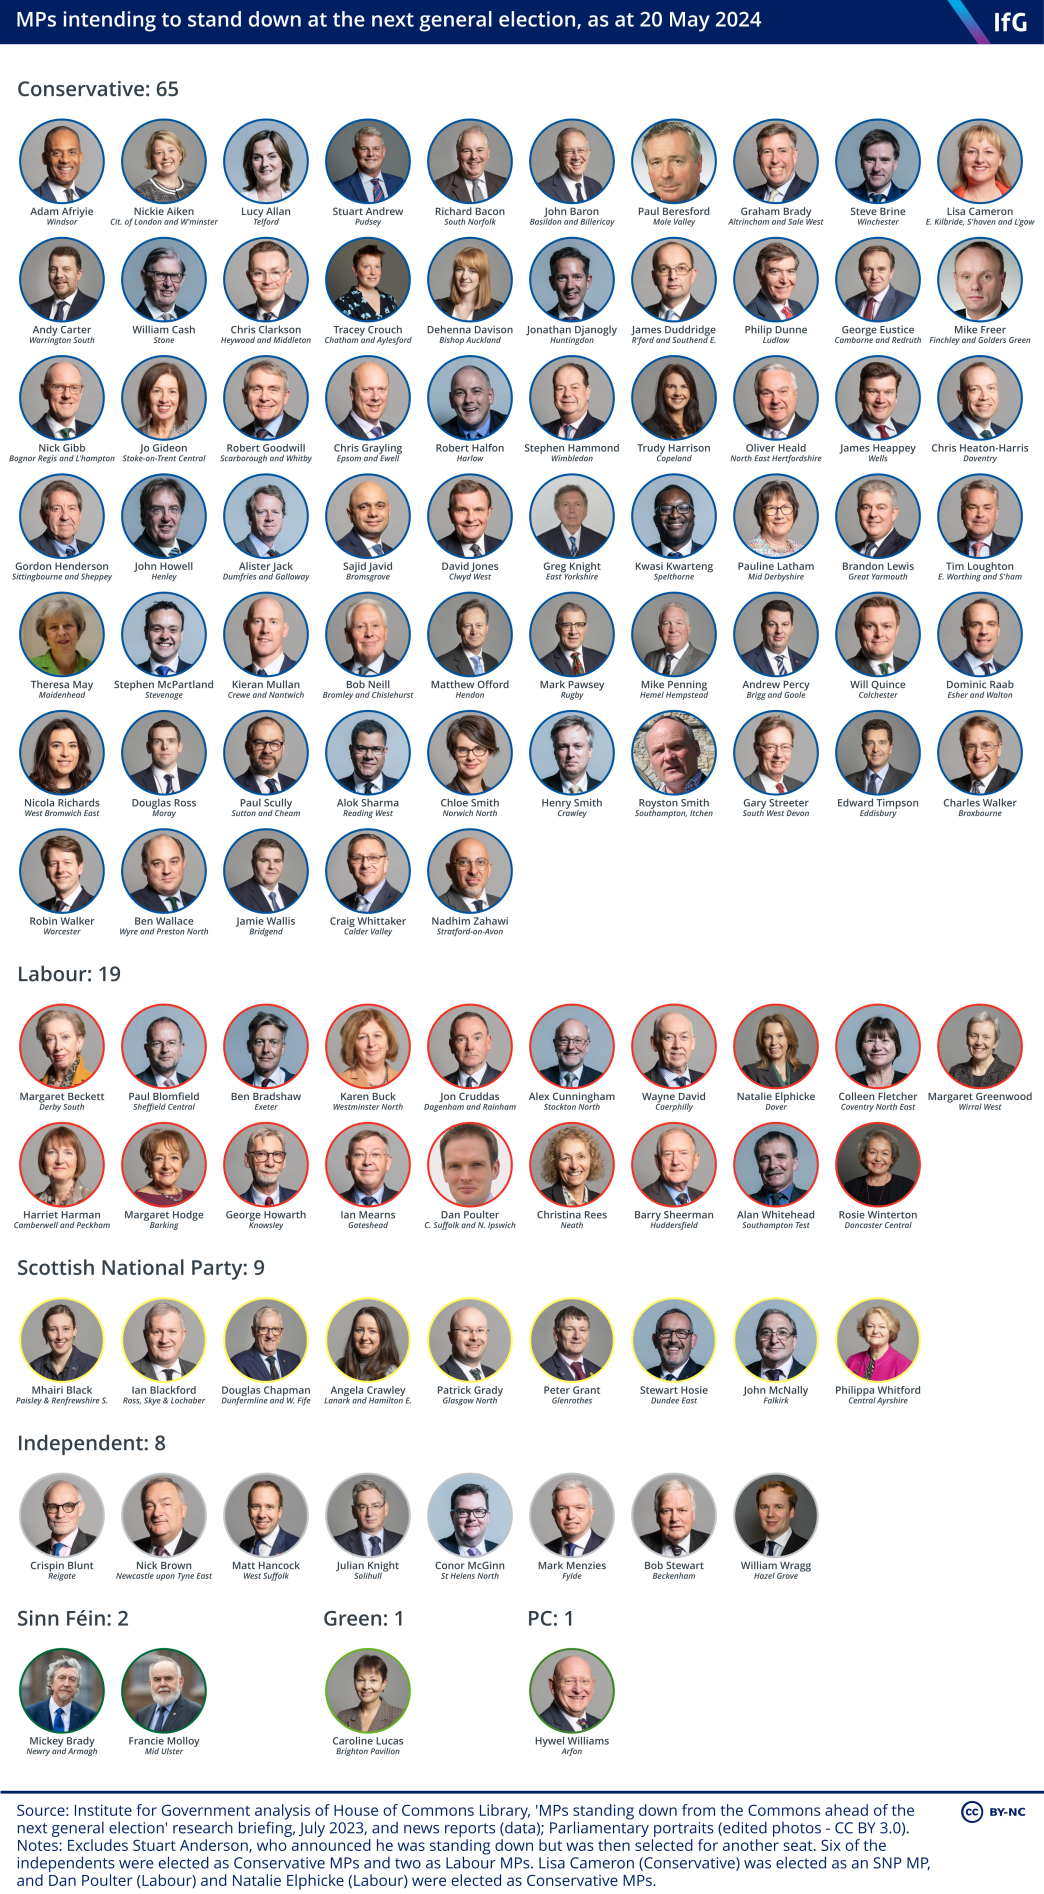 An Institute for Government graphic showing MPs intending to stand down at the next general election, as at 20 May 2024, where there are 105 MPs standing down in total, including 65 Conservative and 19 Labour MPs, and featuring people such as Theresa May, Dominic Raab and Matt Hancock.